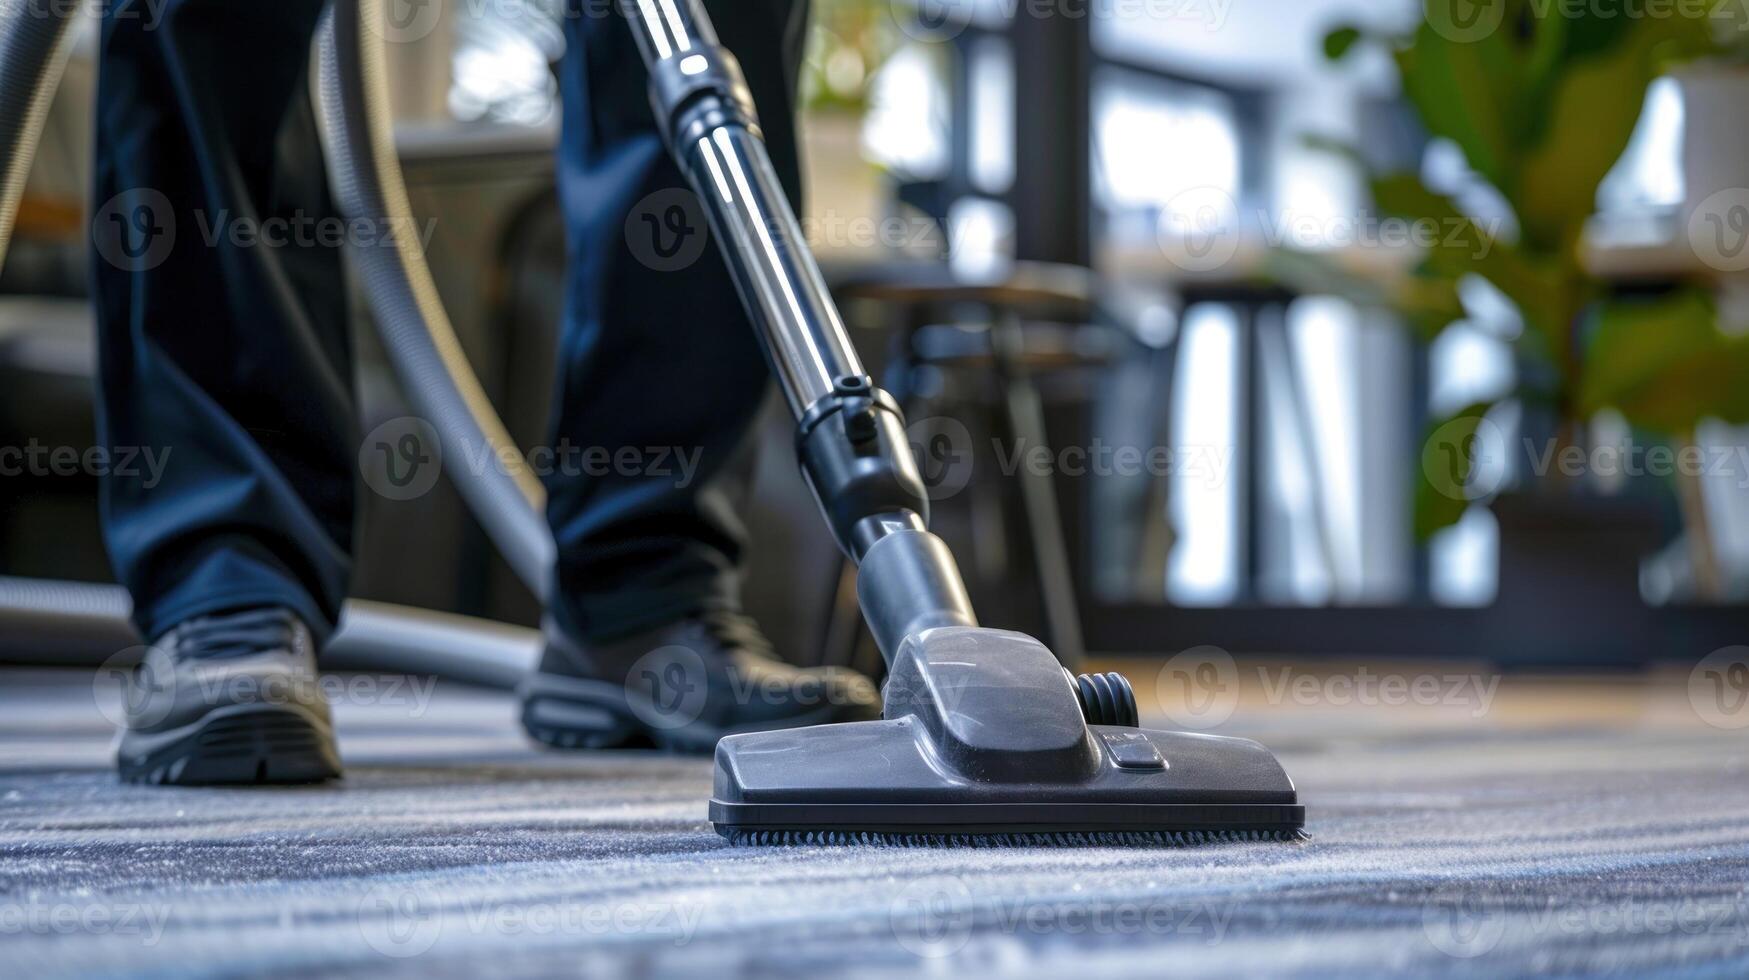 A person is vacuuming a carpet photo